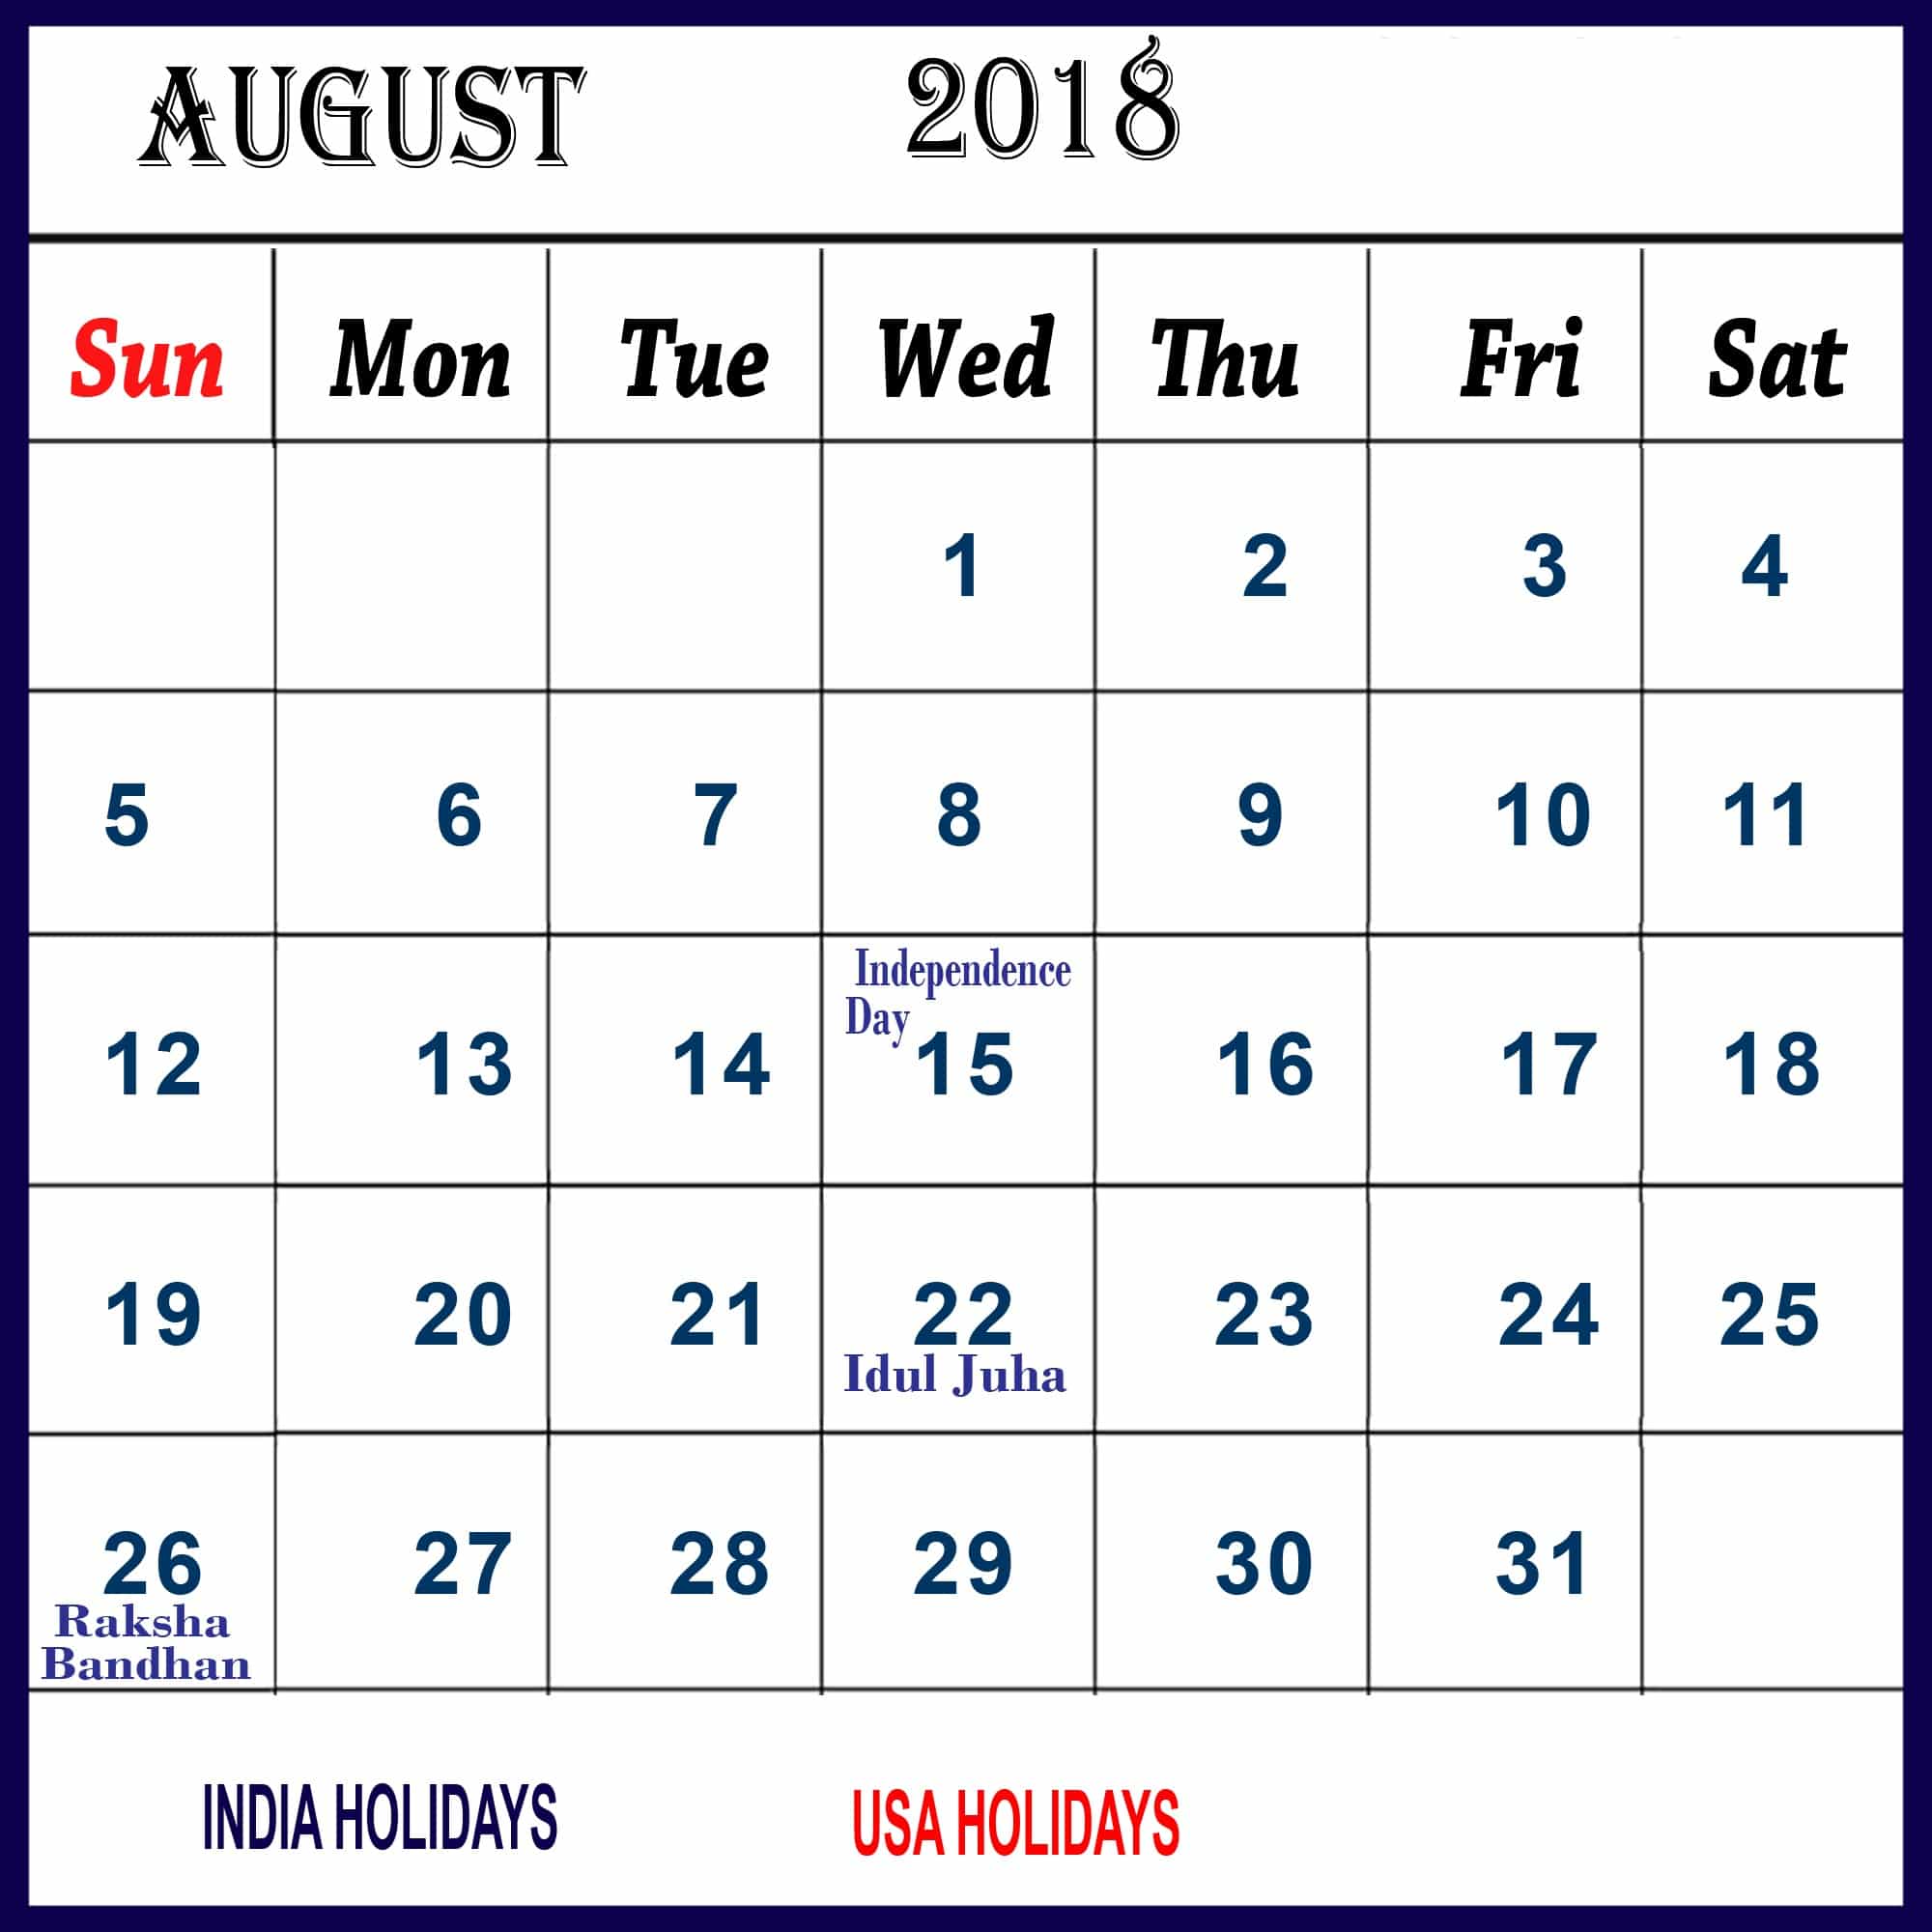 august-2018-calendar-with-indian-holidays-oppidan-library